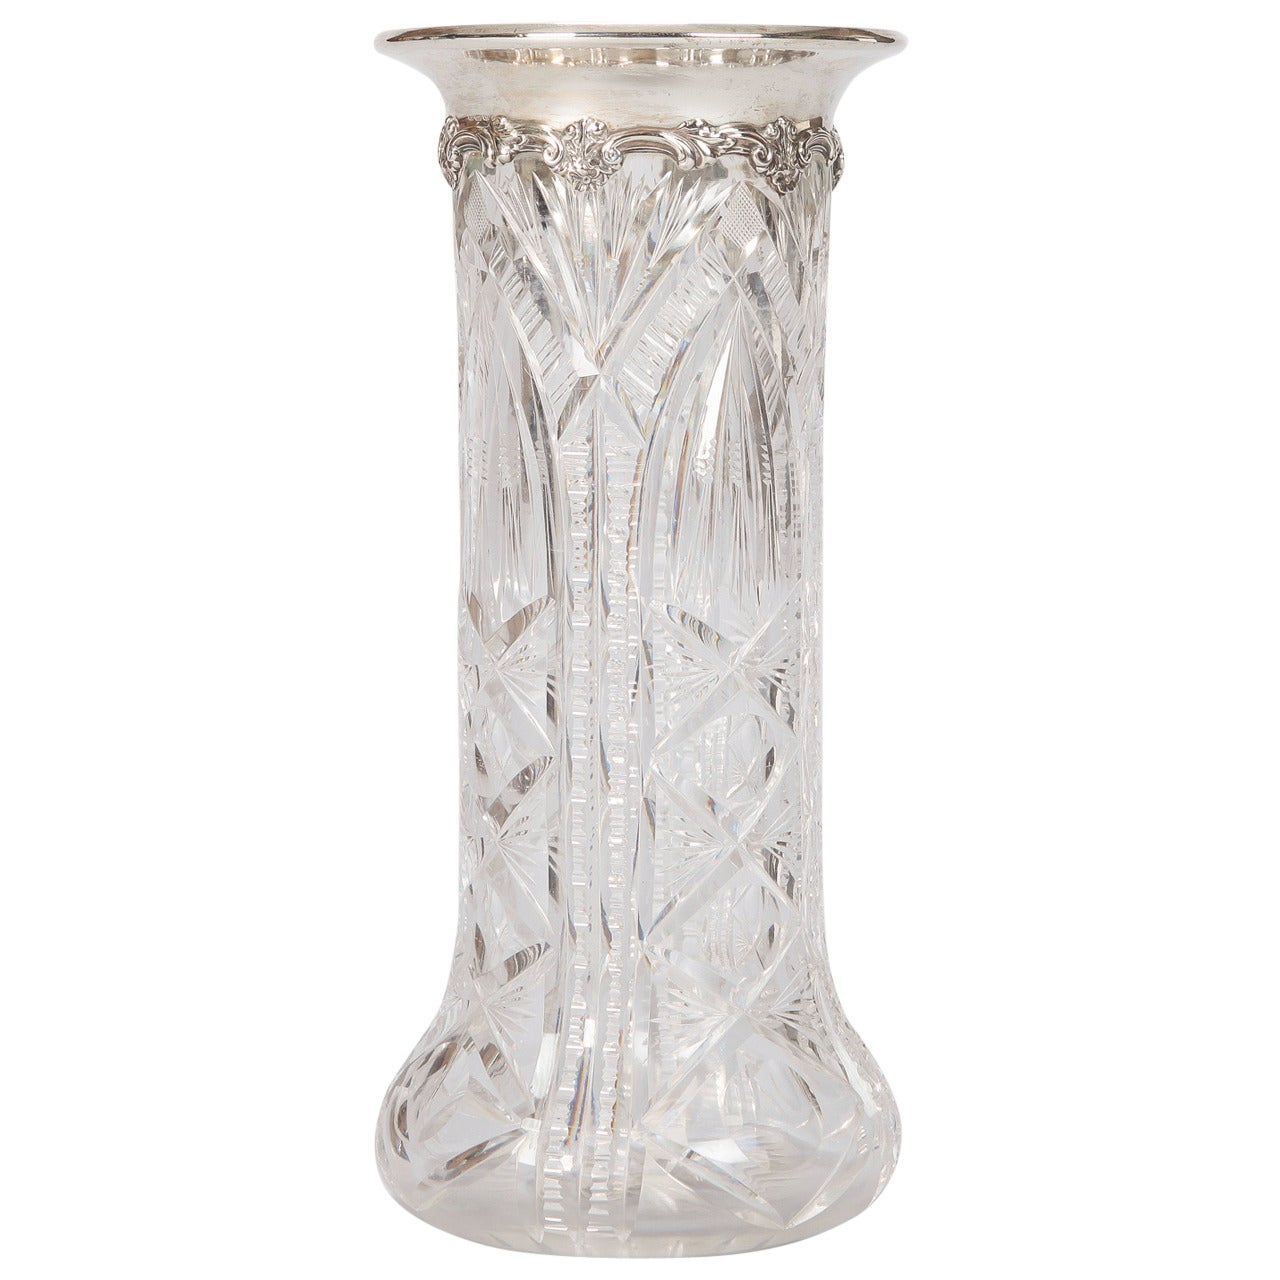 Heavy Carved Crystal Vase with Sterling Silver Rim